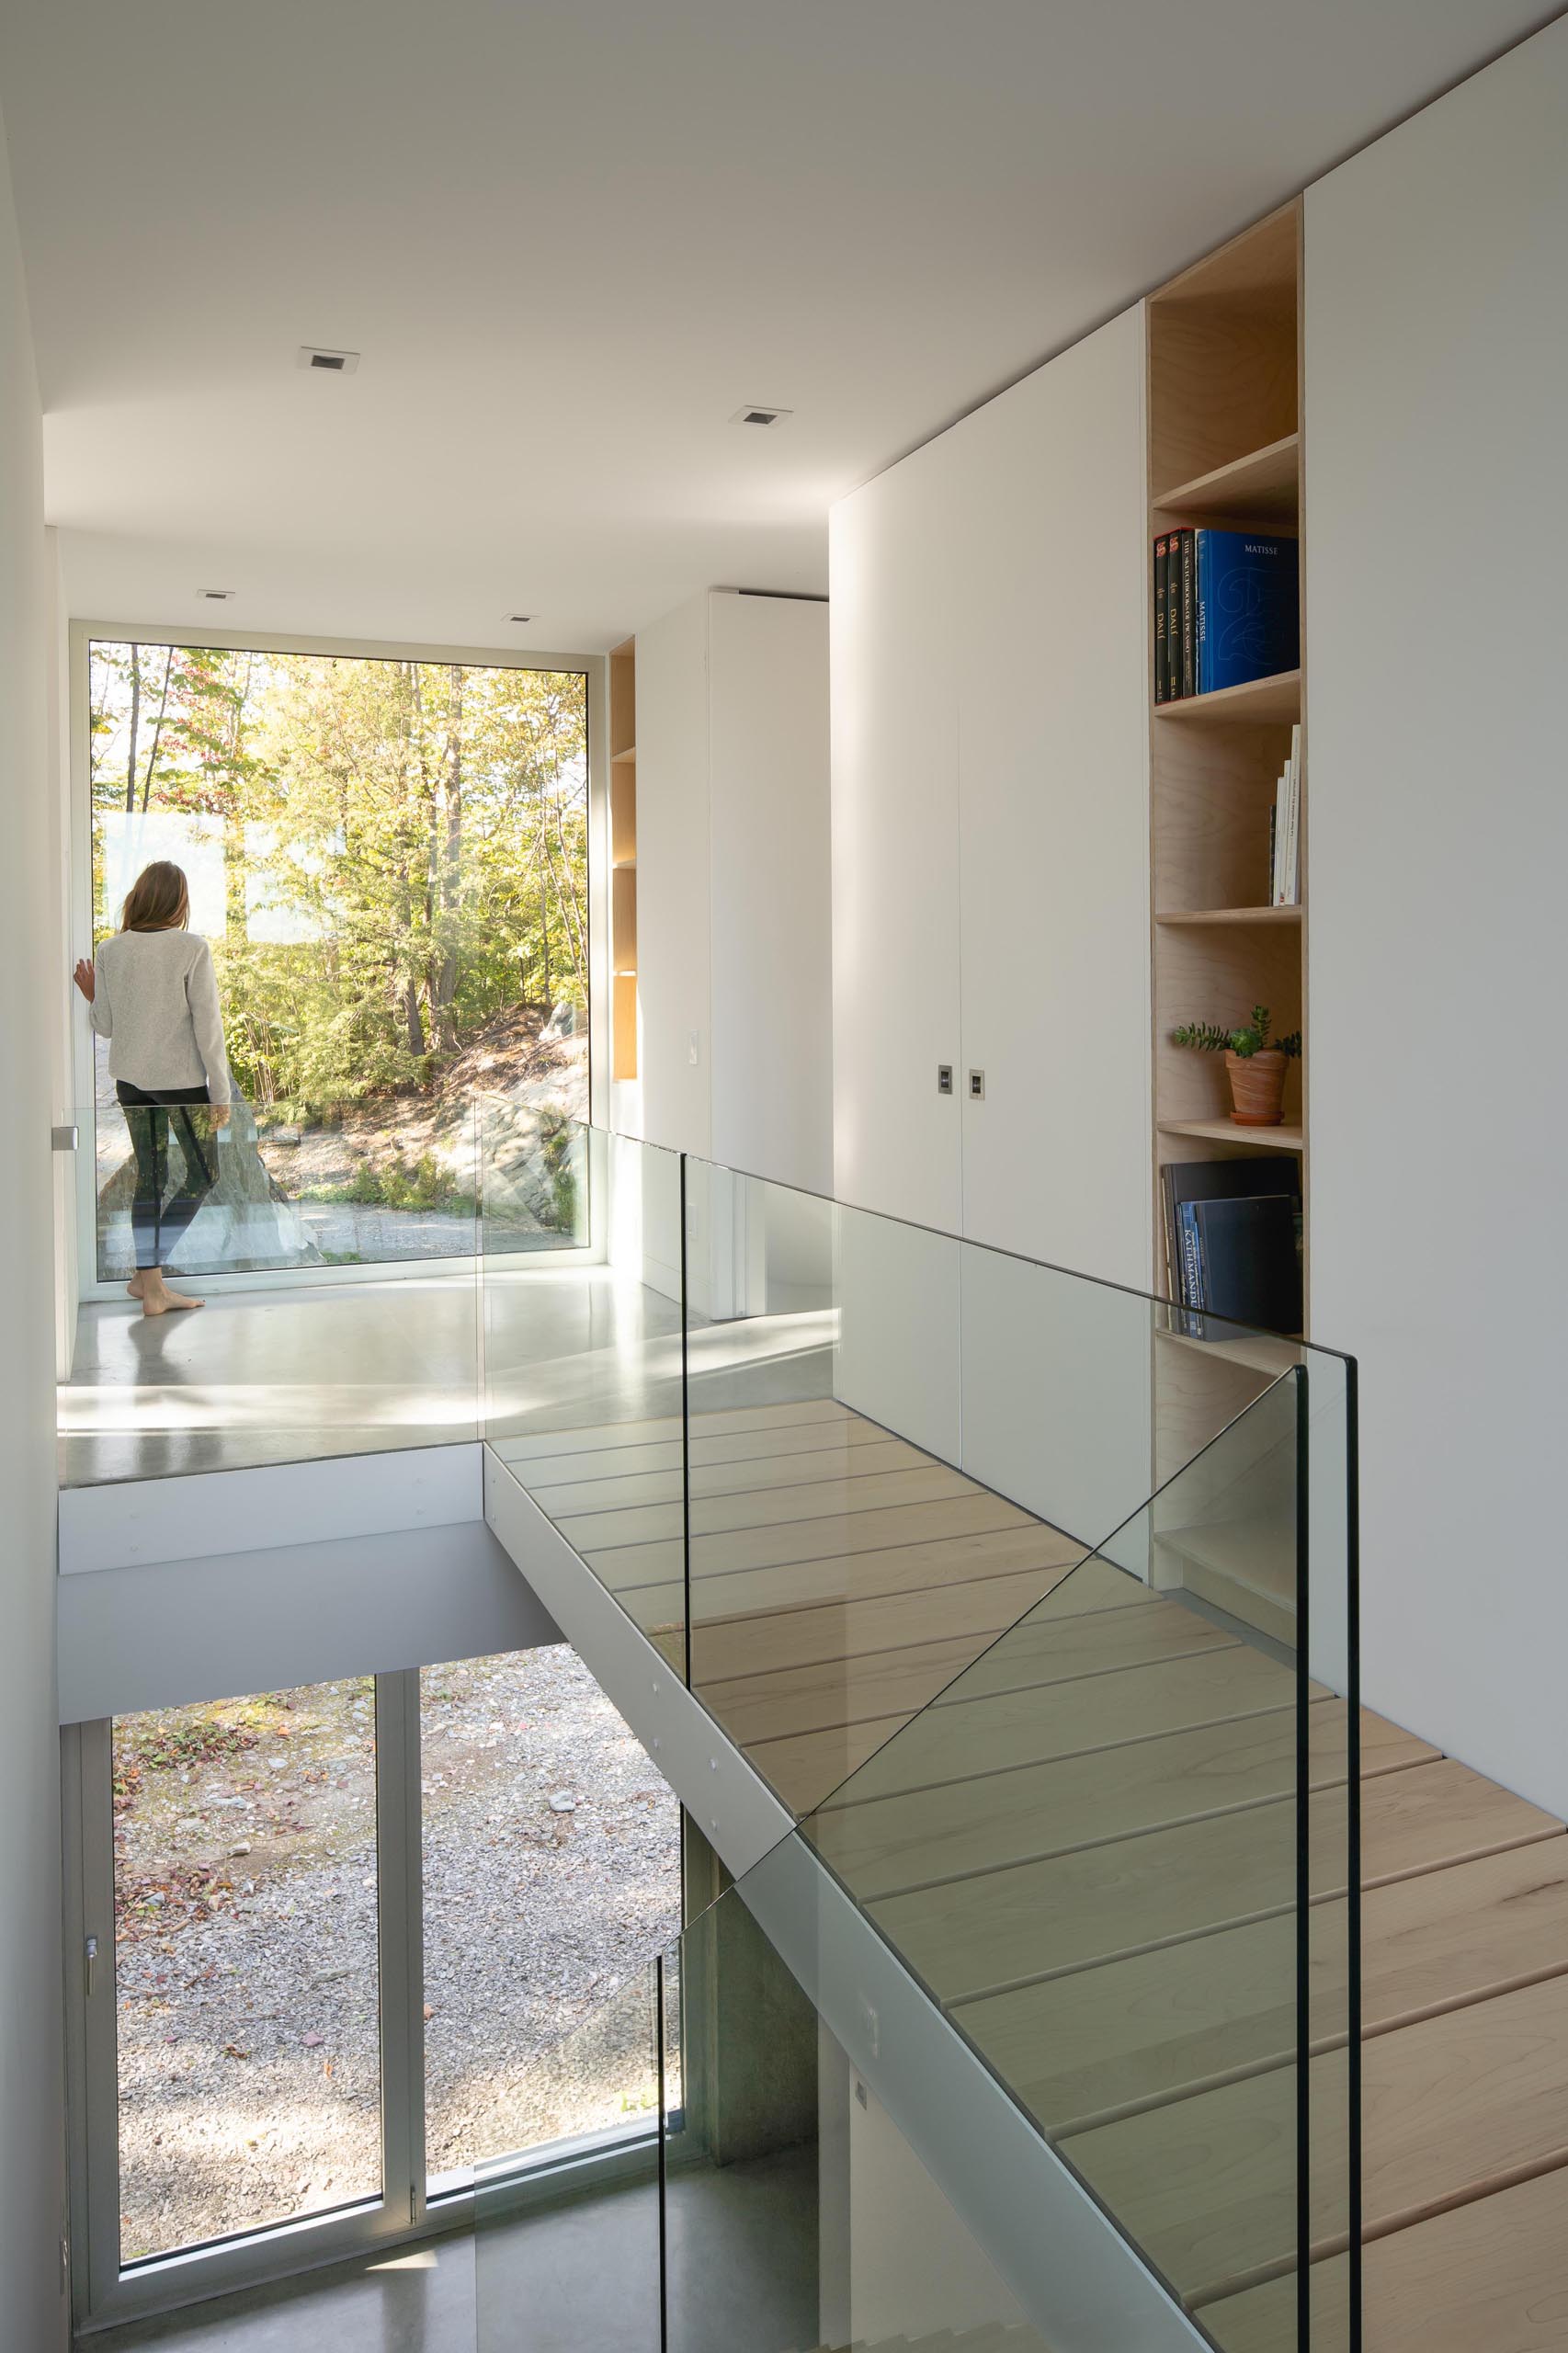 A modern home interior with wood stairs and glass handrails.